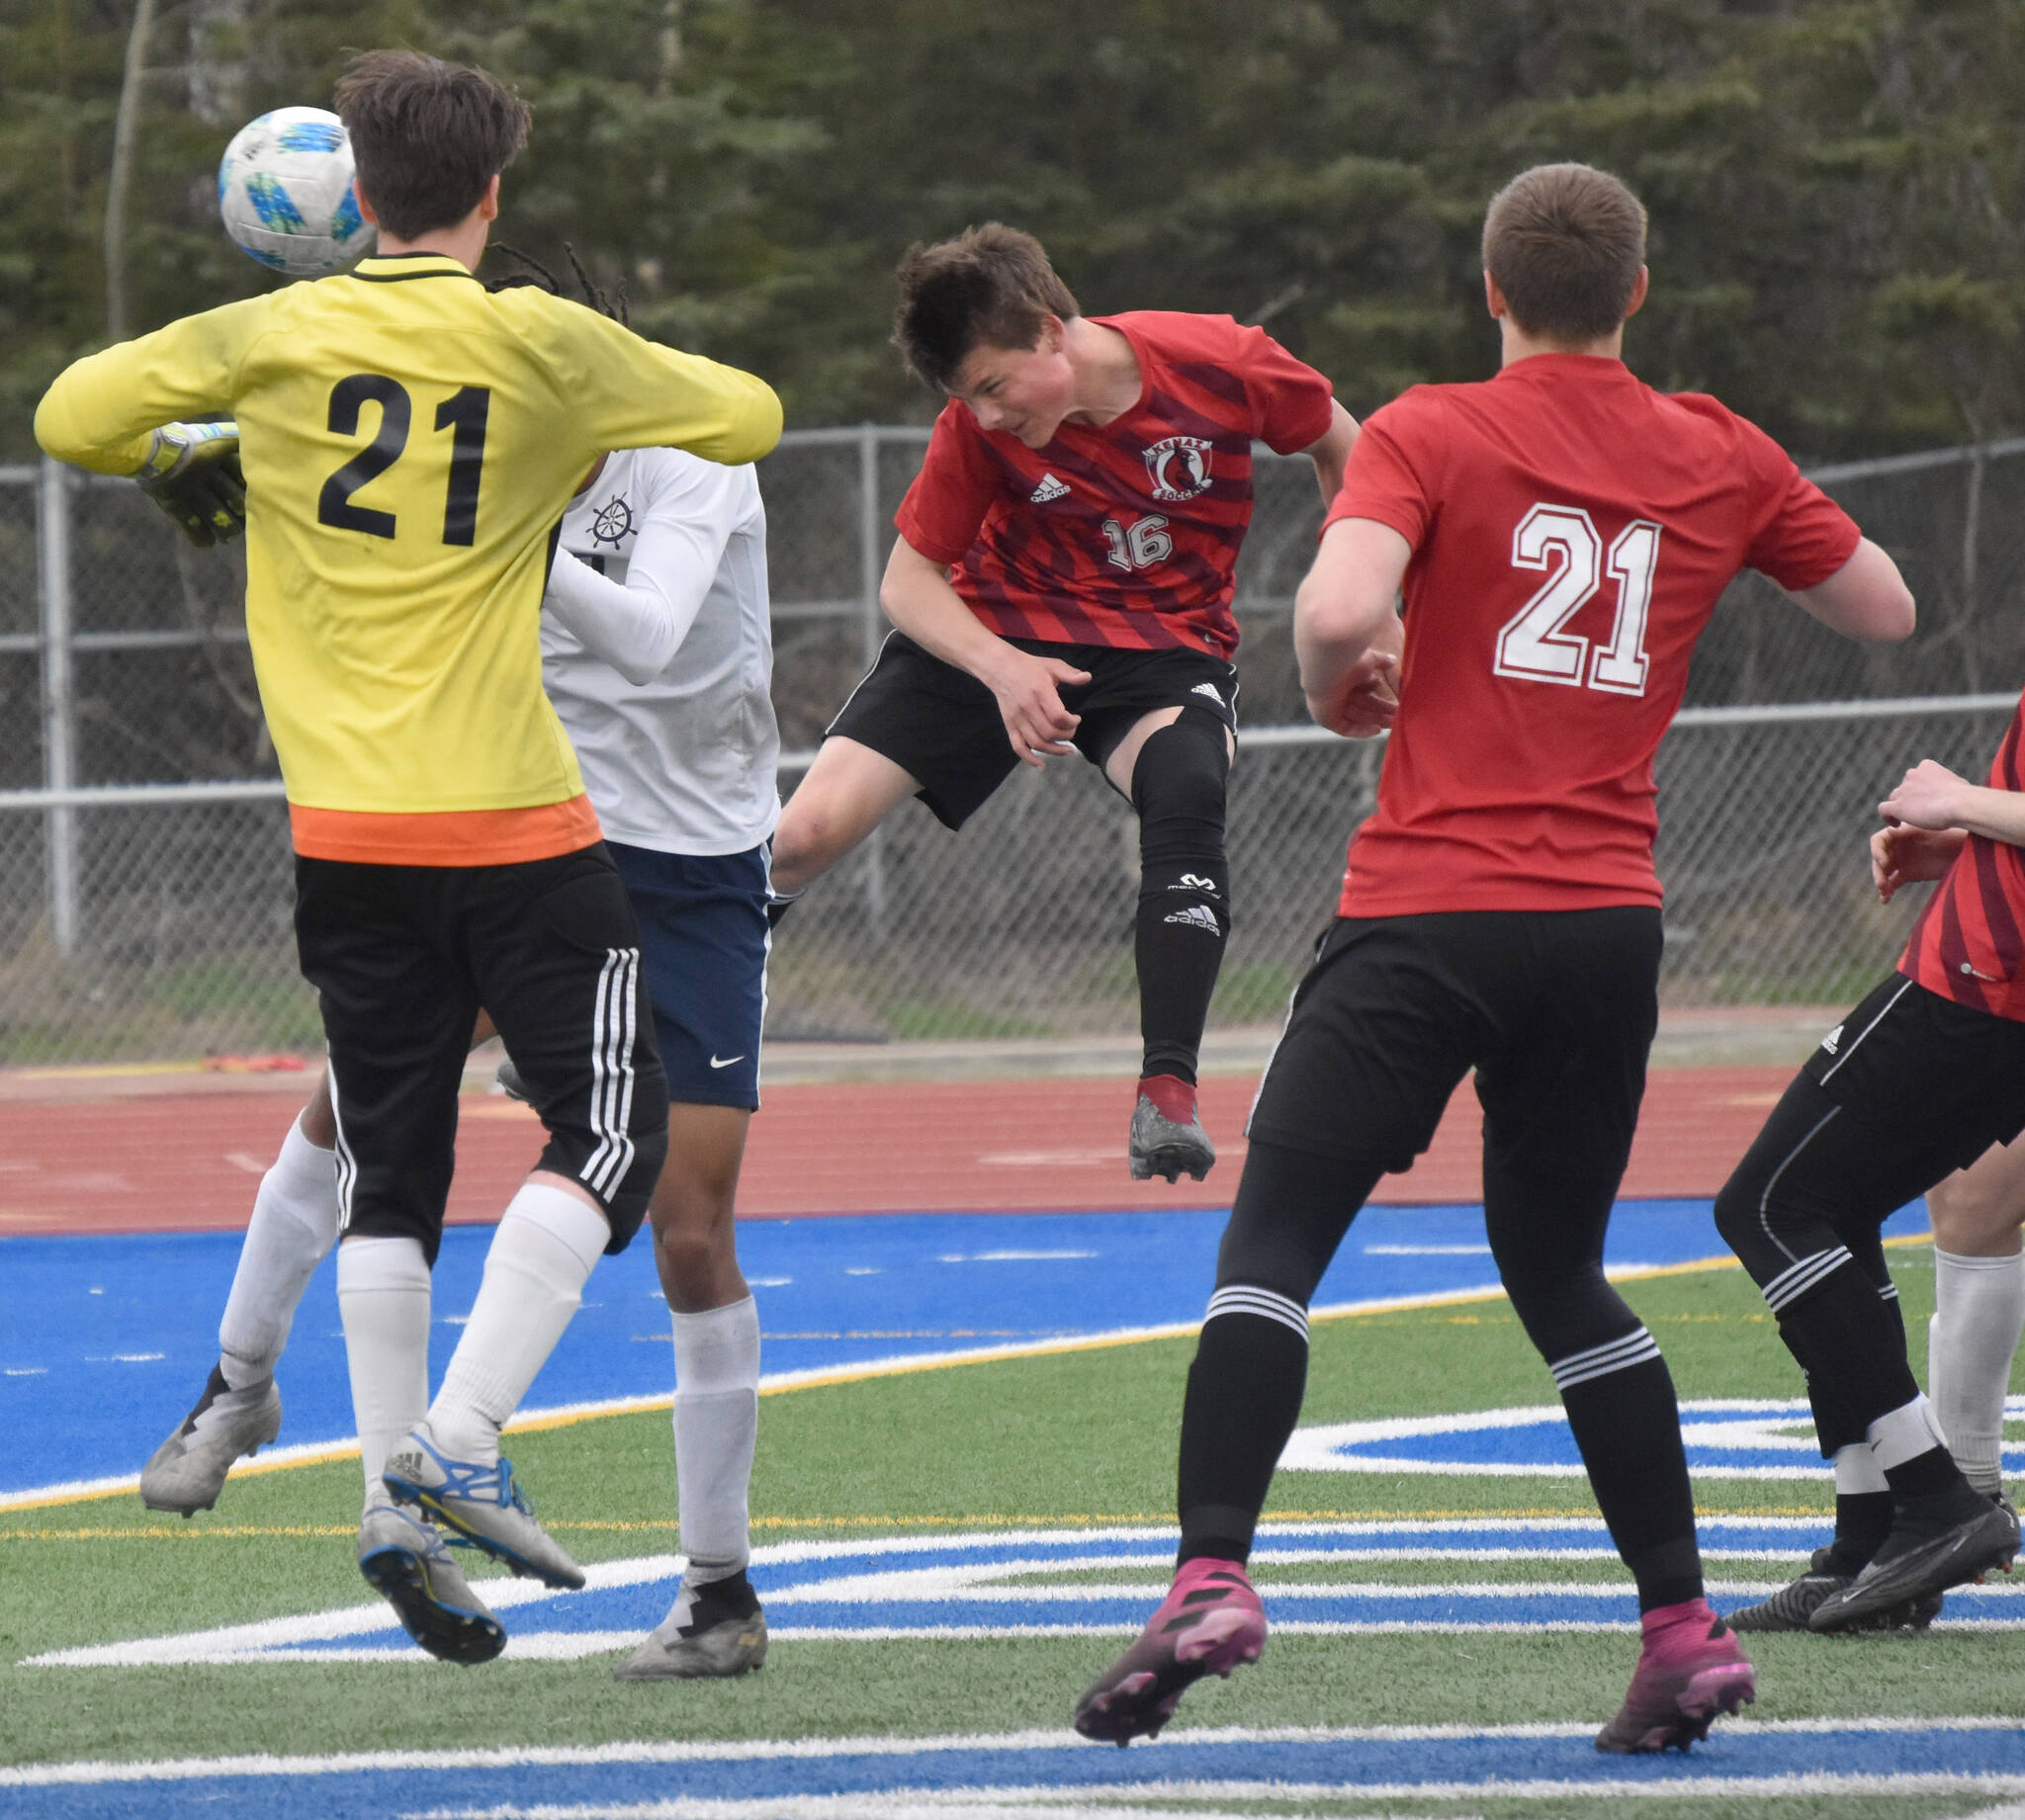 Kenai Central’s Sawyer Vann heads in the game-winning goal against Homer in the semifinals of the Peninsula Conference tournament Friday, May 19, 2023, at Justin Maile Field at Soldotna High School in Soldotna, Alaska. (Photo by Jeff Helminiak/Peninsula Clarion)